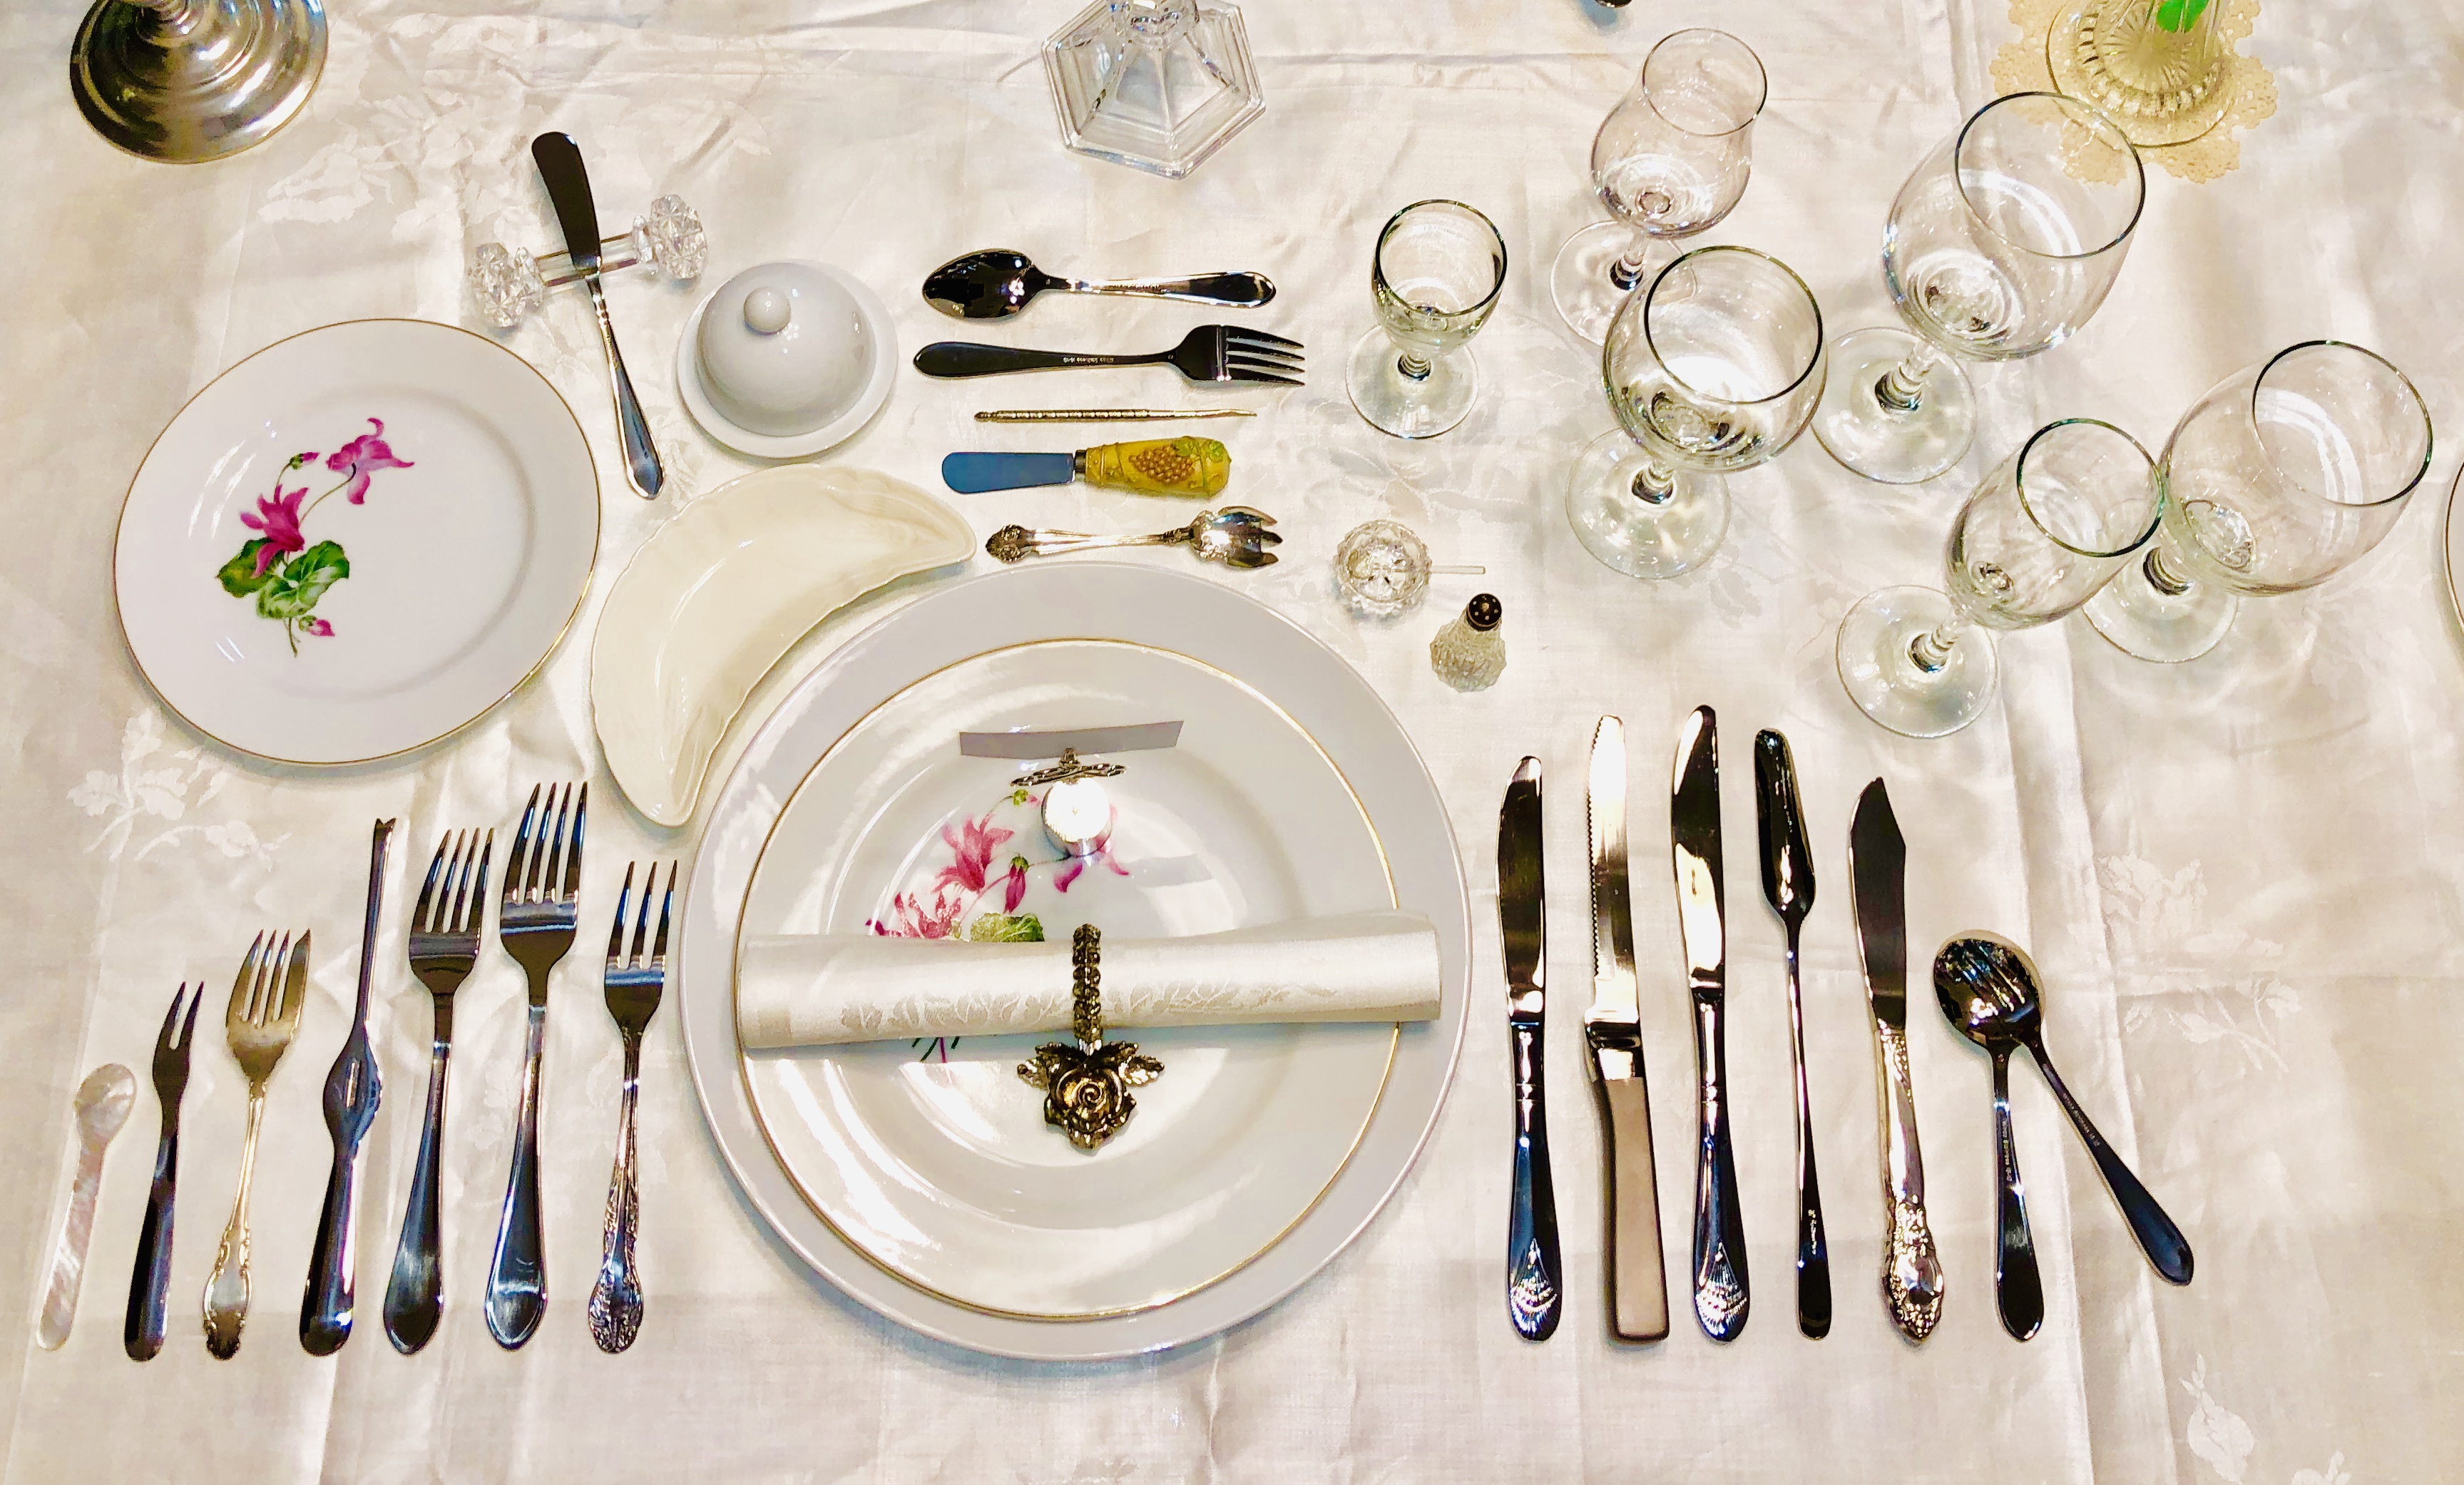 File:13 course table setting French style overhead view.jpg - Wikimedia  Commons